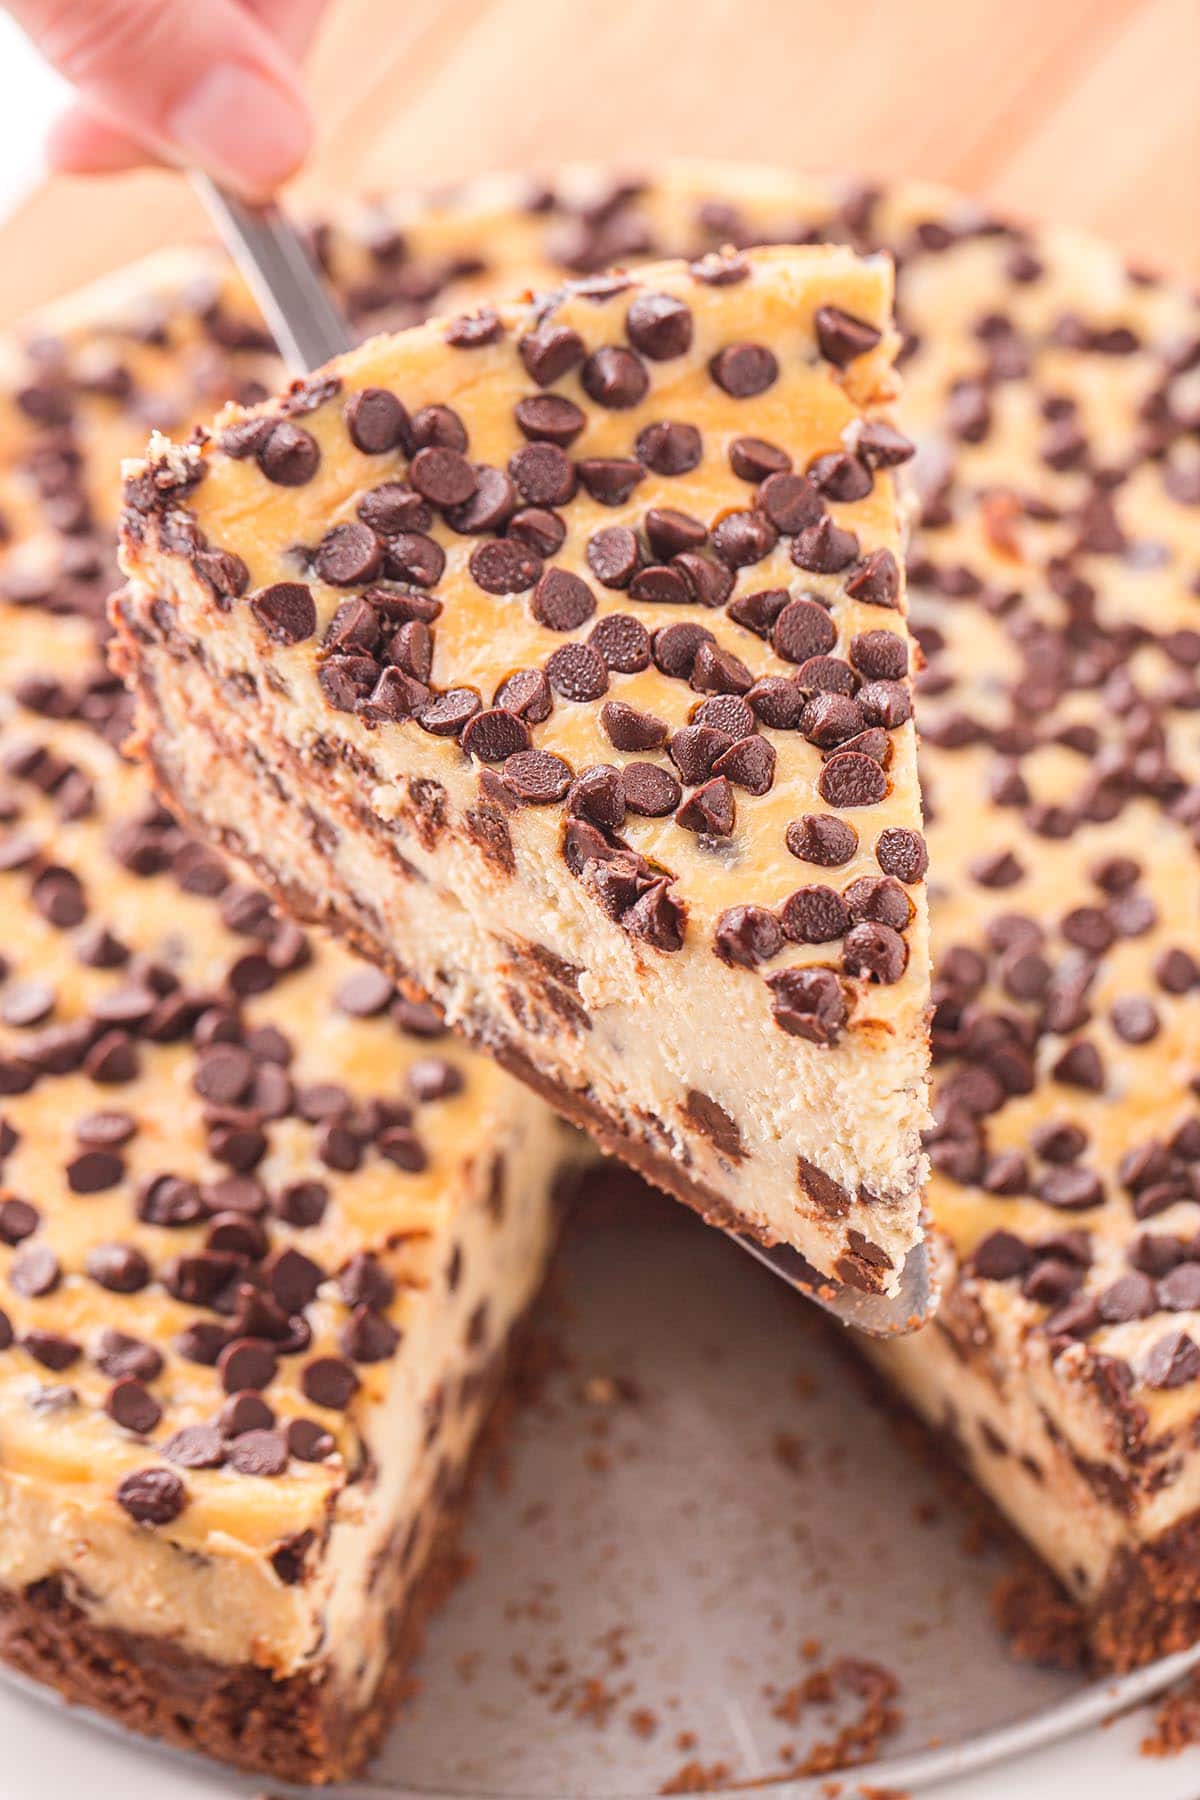 serving a slice of Chocolate Chip Cheesecake.